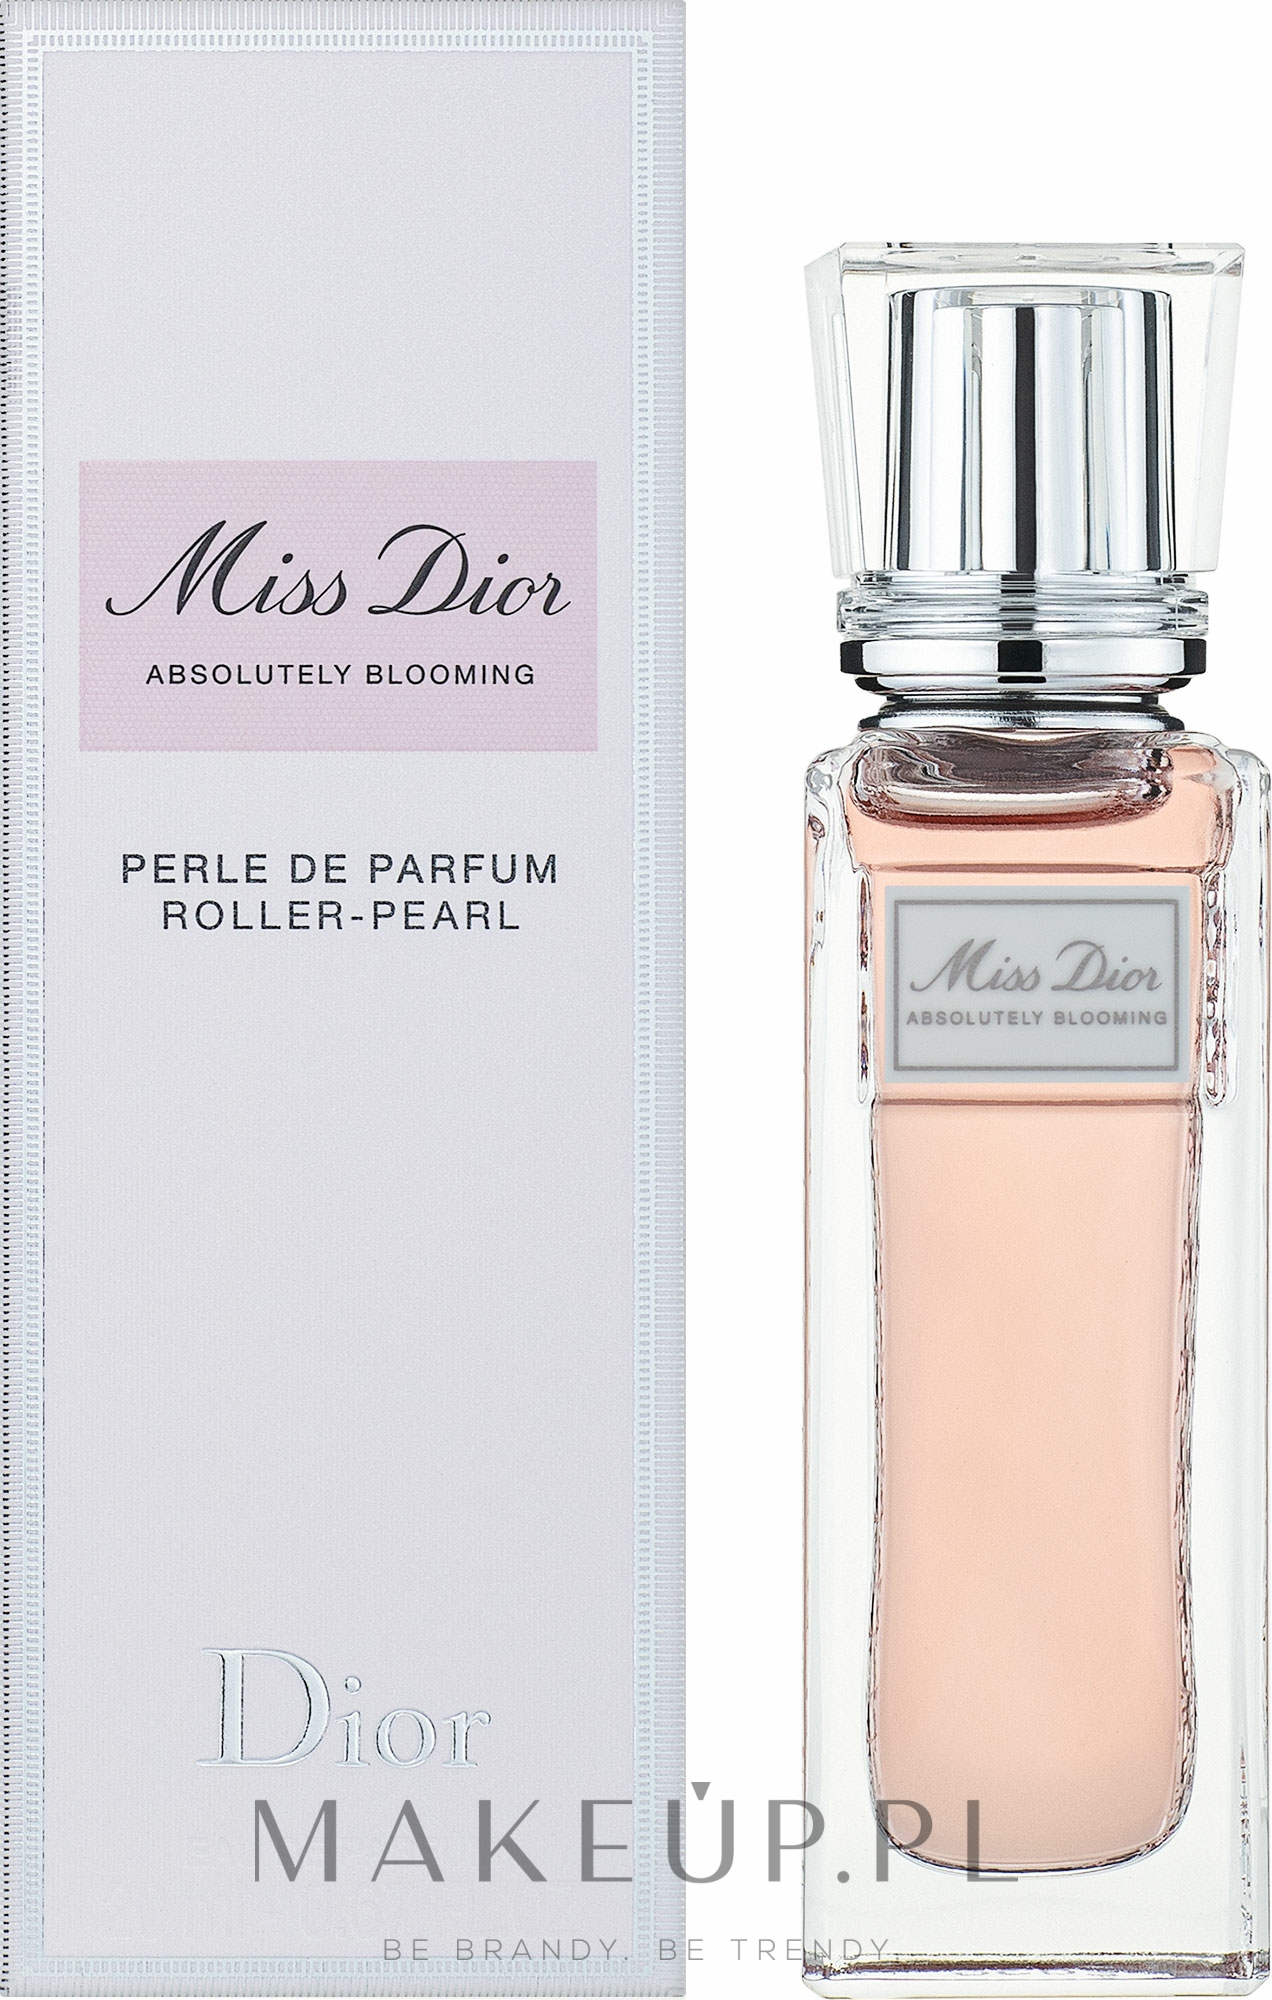 Dior Miss Dior Absolutely Blooming - Woda perfumowana (roll-on) | Makeup.pl